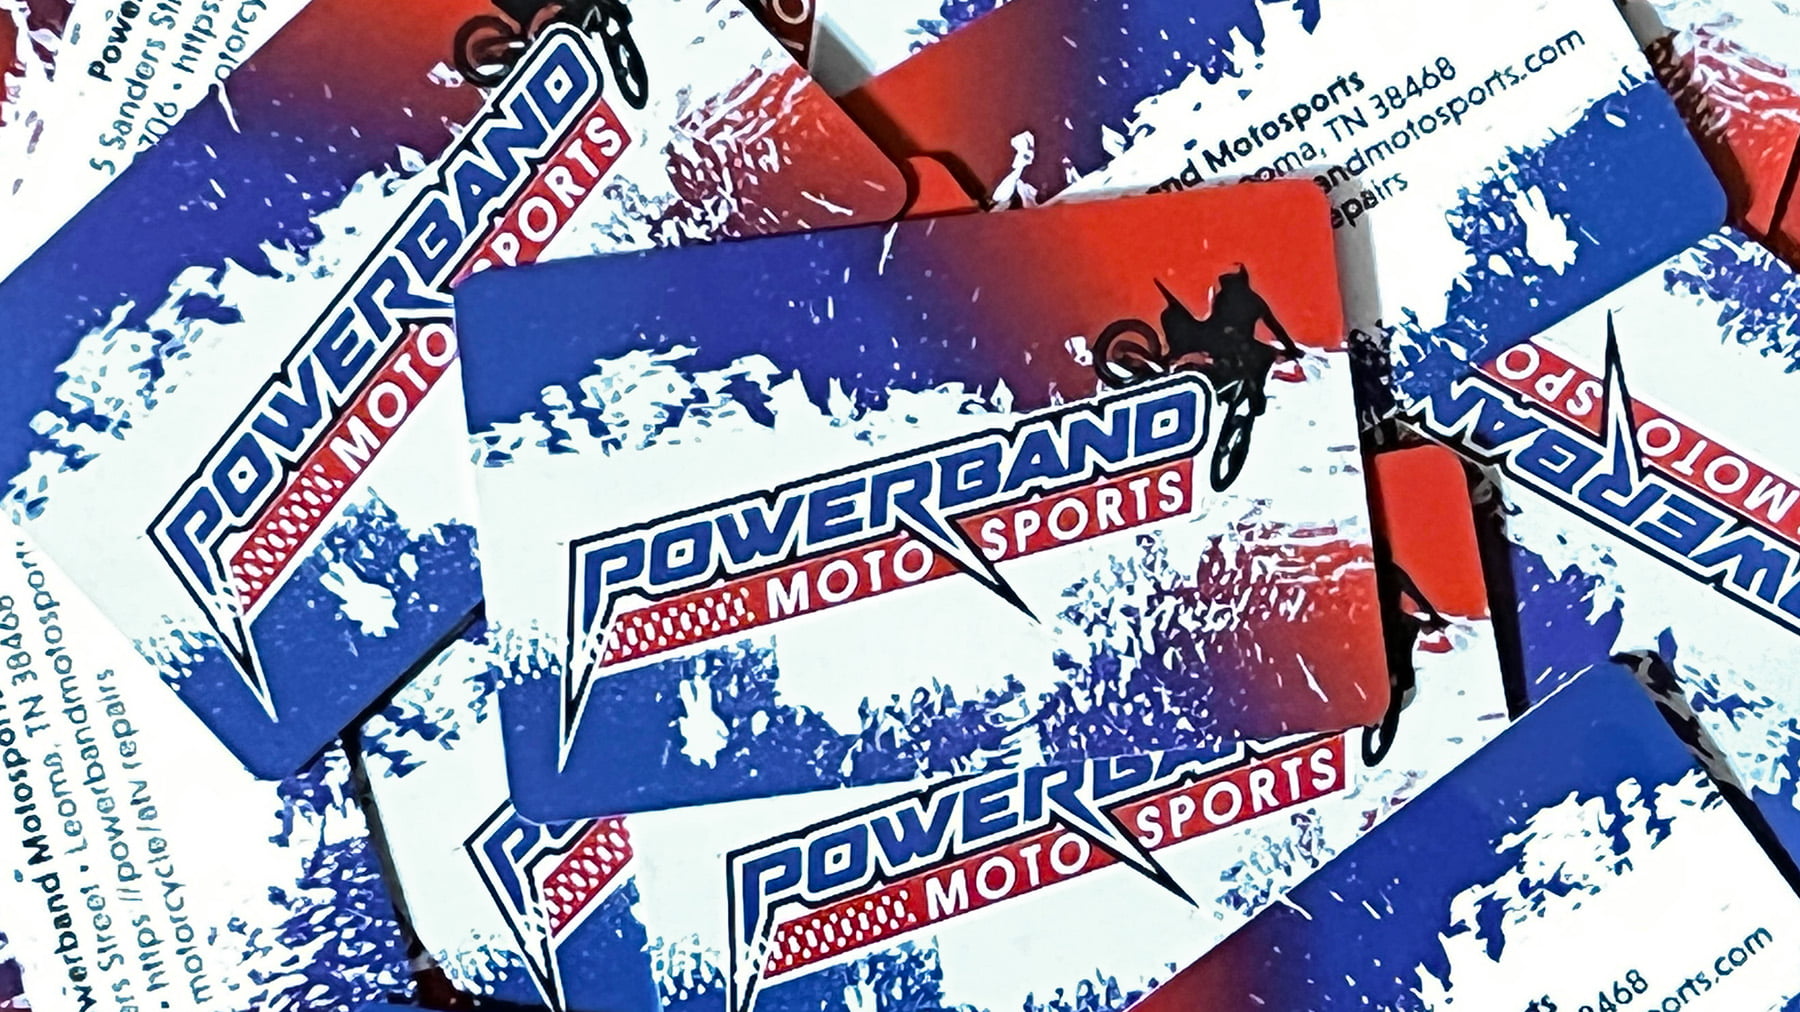 Powerband Motosports hired Rimshot Creative to design their logo and business cards.